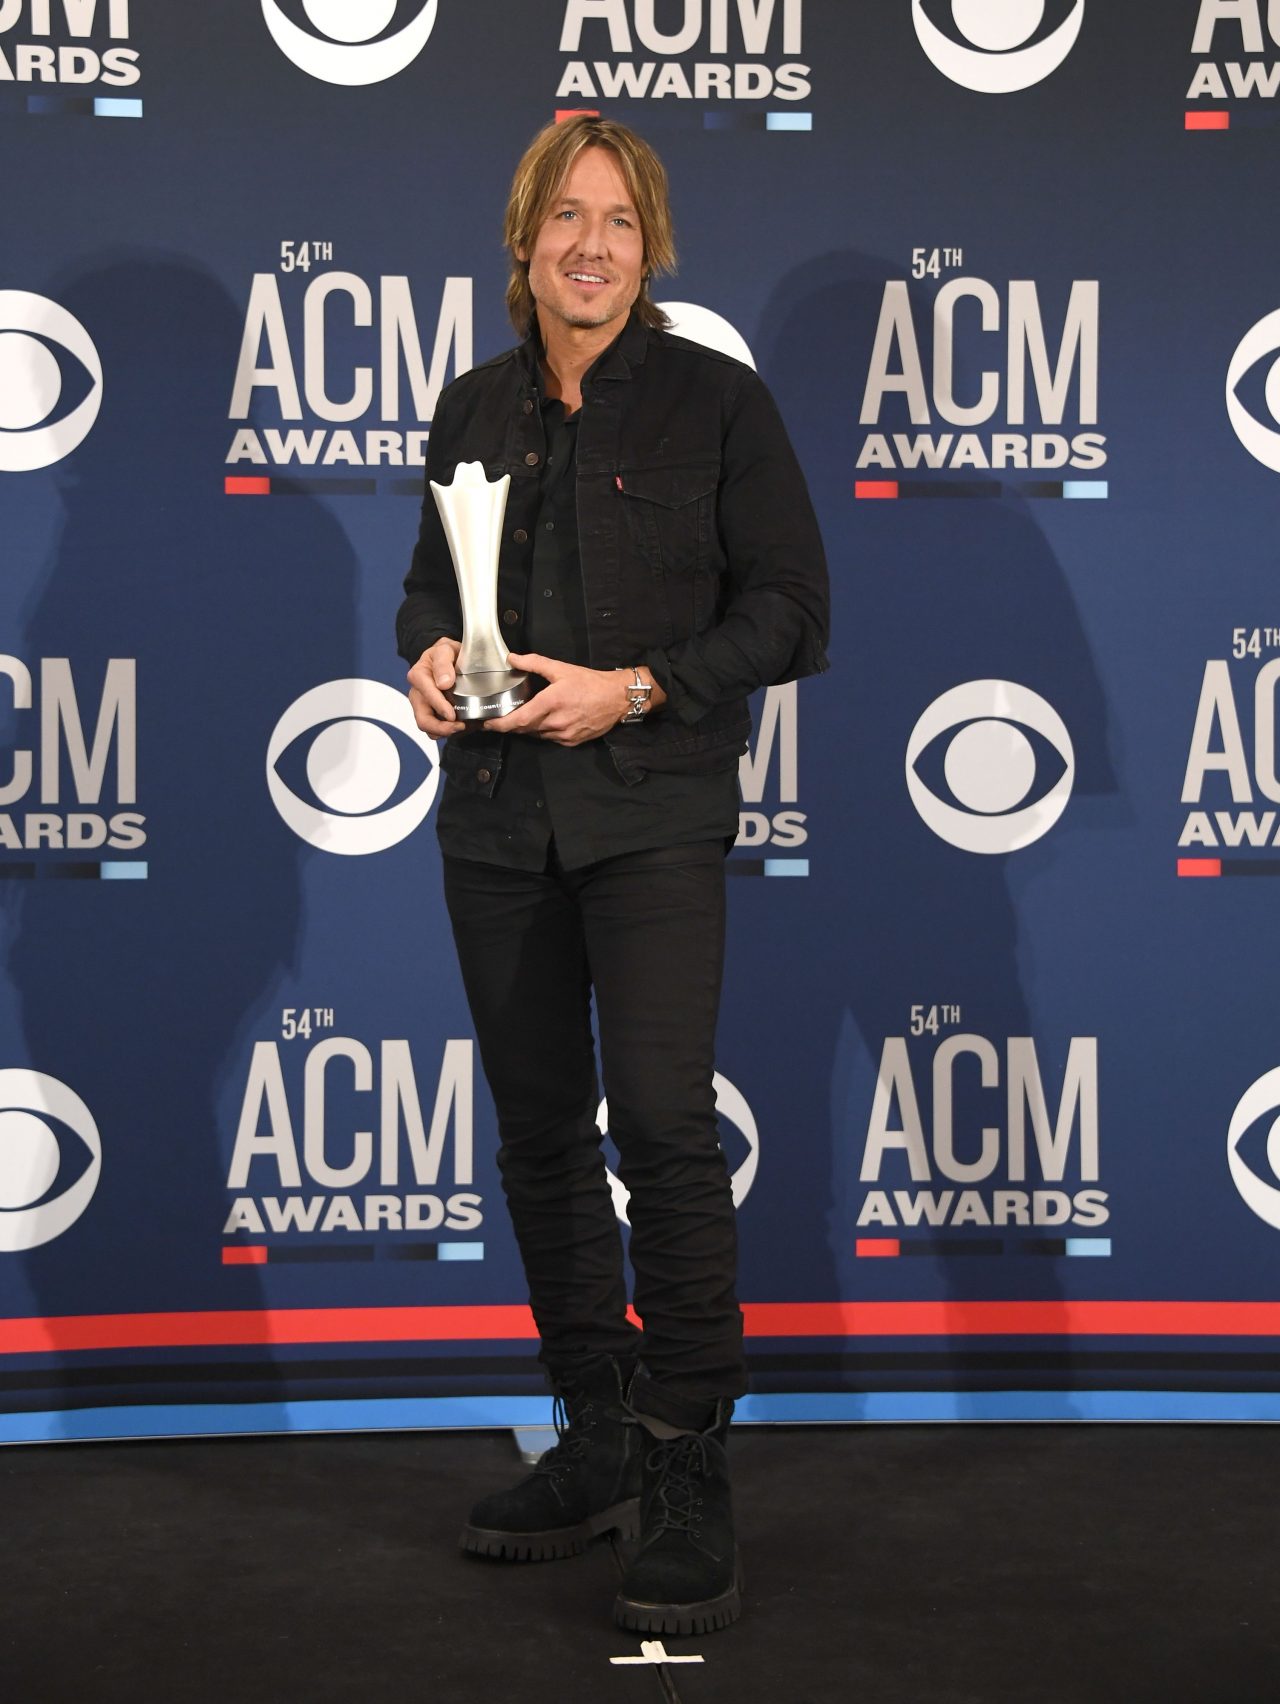 54th Academy Of Country Music Awards – Press Room